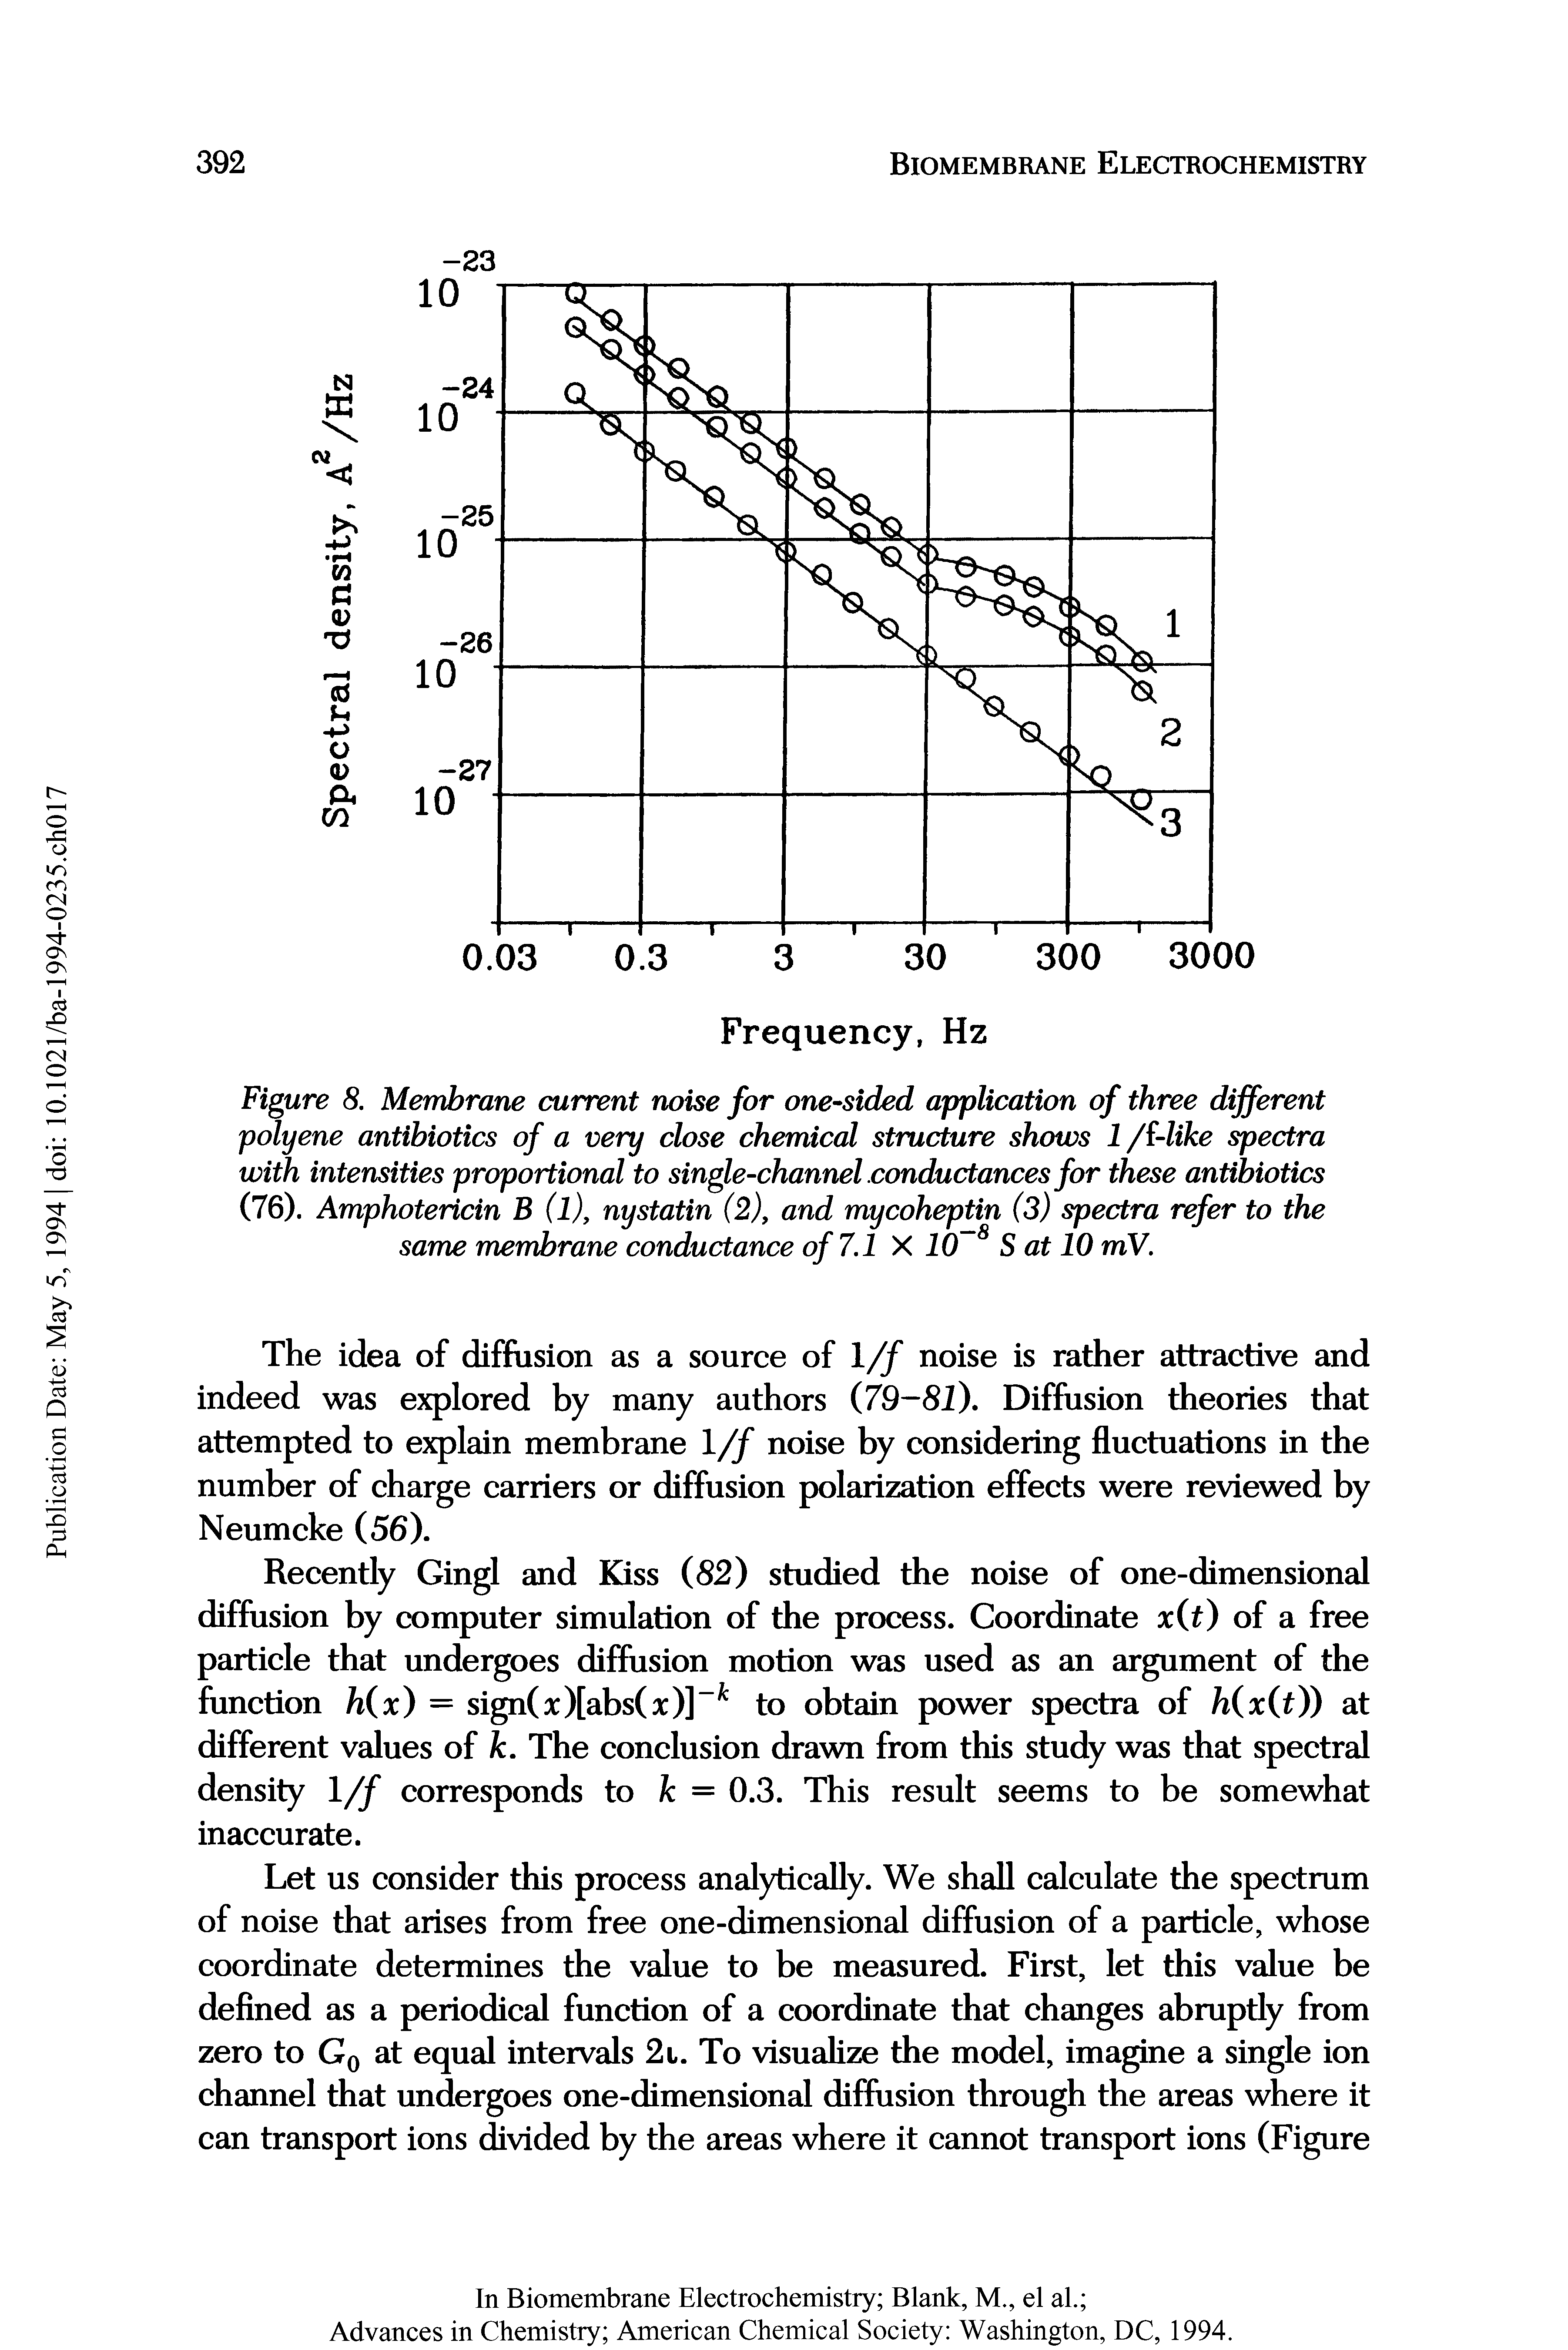 Figure 8. Membrane current noise for one-sided application of three different polyene antibiotics of a very close chemical structure shows 1 / -like spectra with intensities proportional to single-channel conductances for these antibiotics (76). Amphotericin B (l), nystatin (2), and mycoheptin (3) spectra refer to the same membrane conductance of 7.1 X 10 8 S at 10 mV.